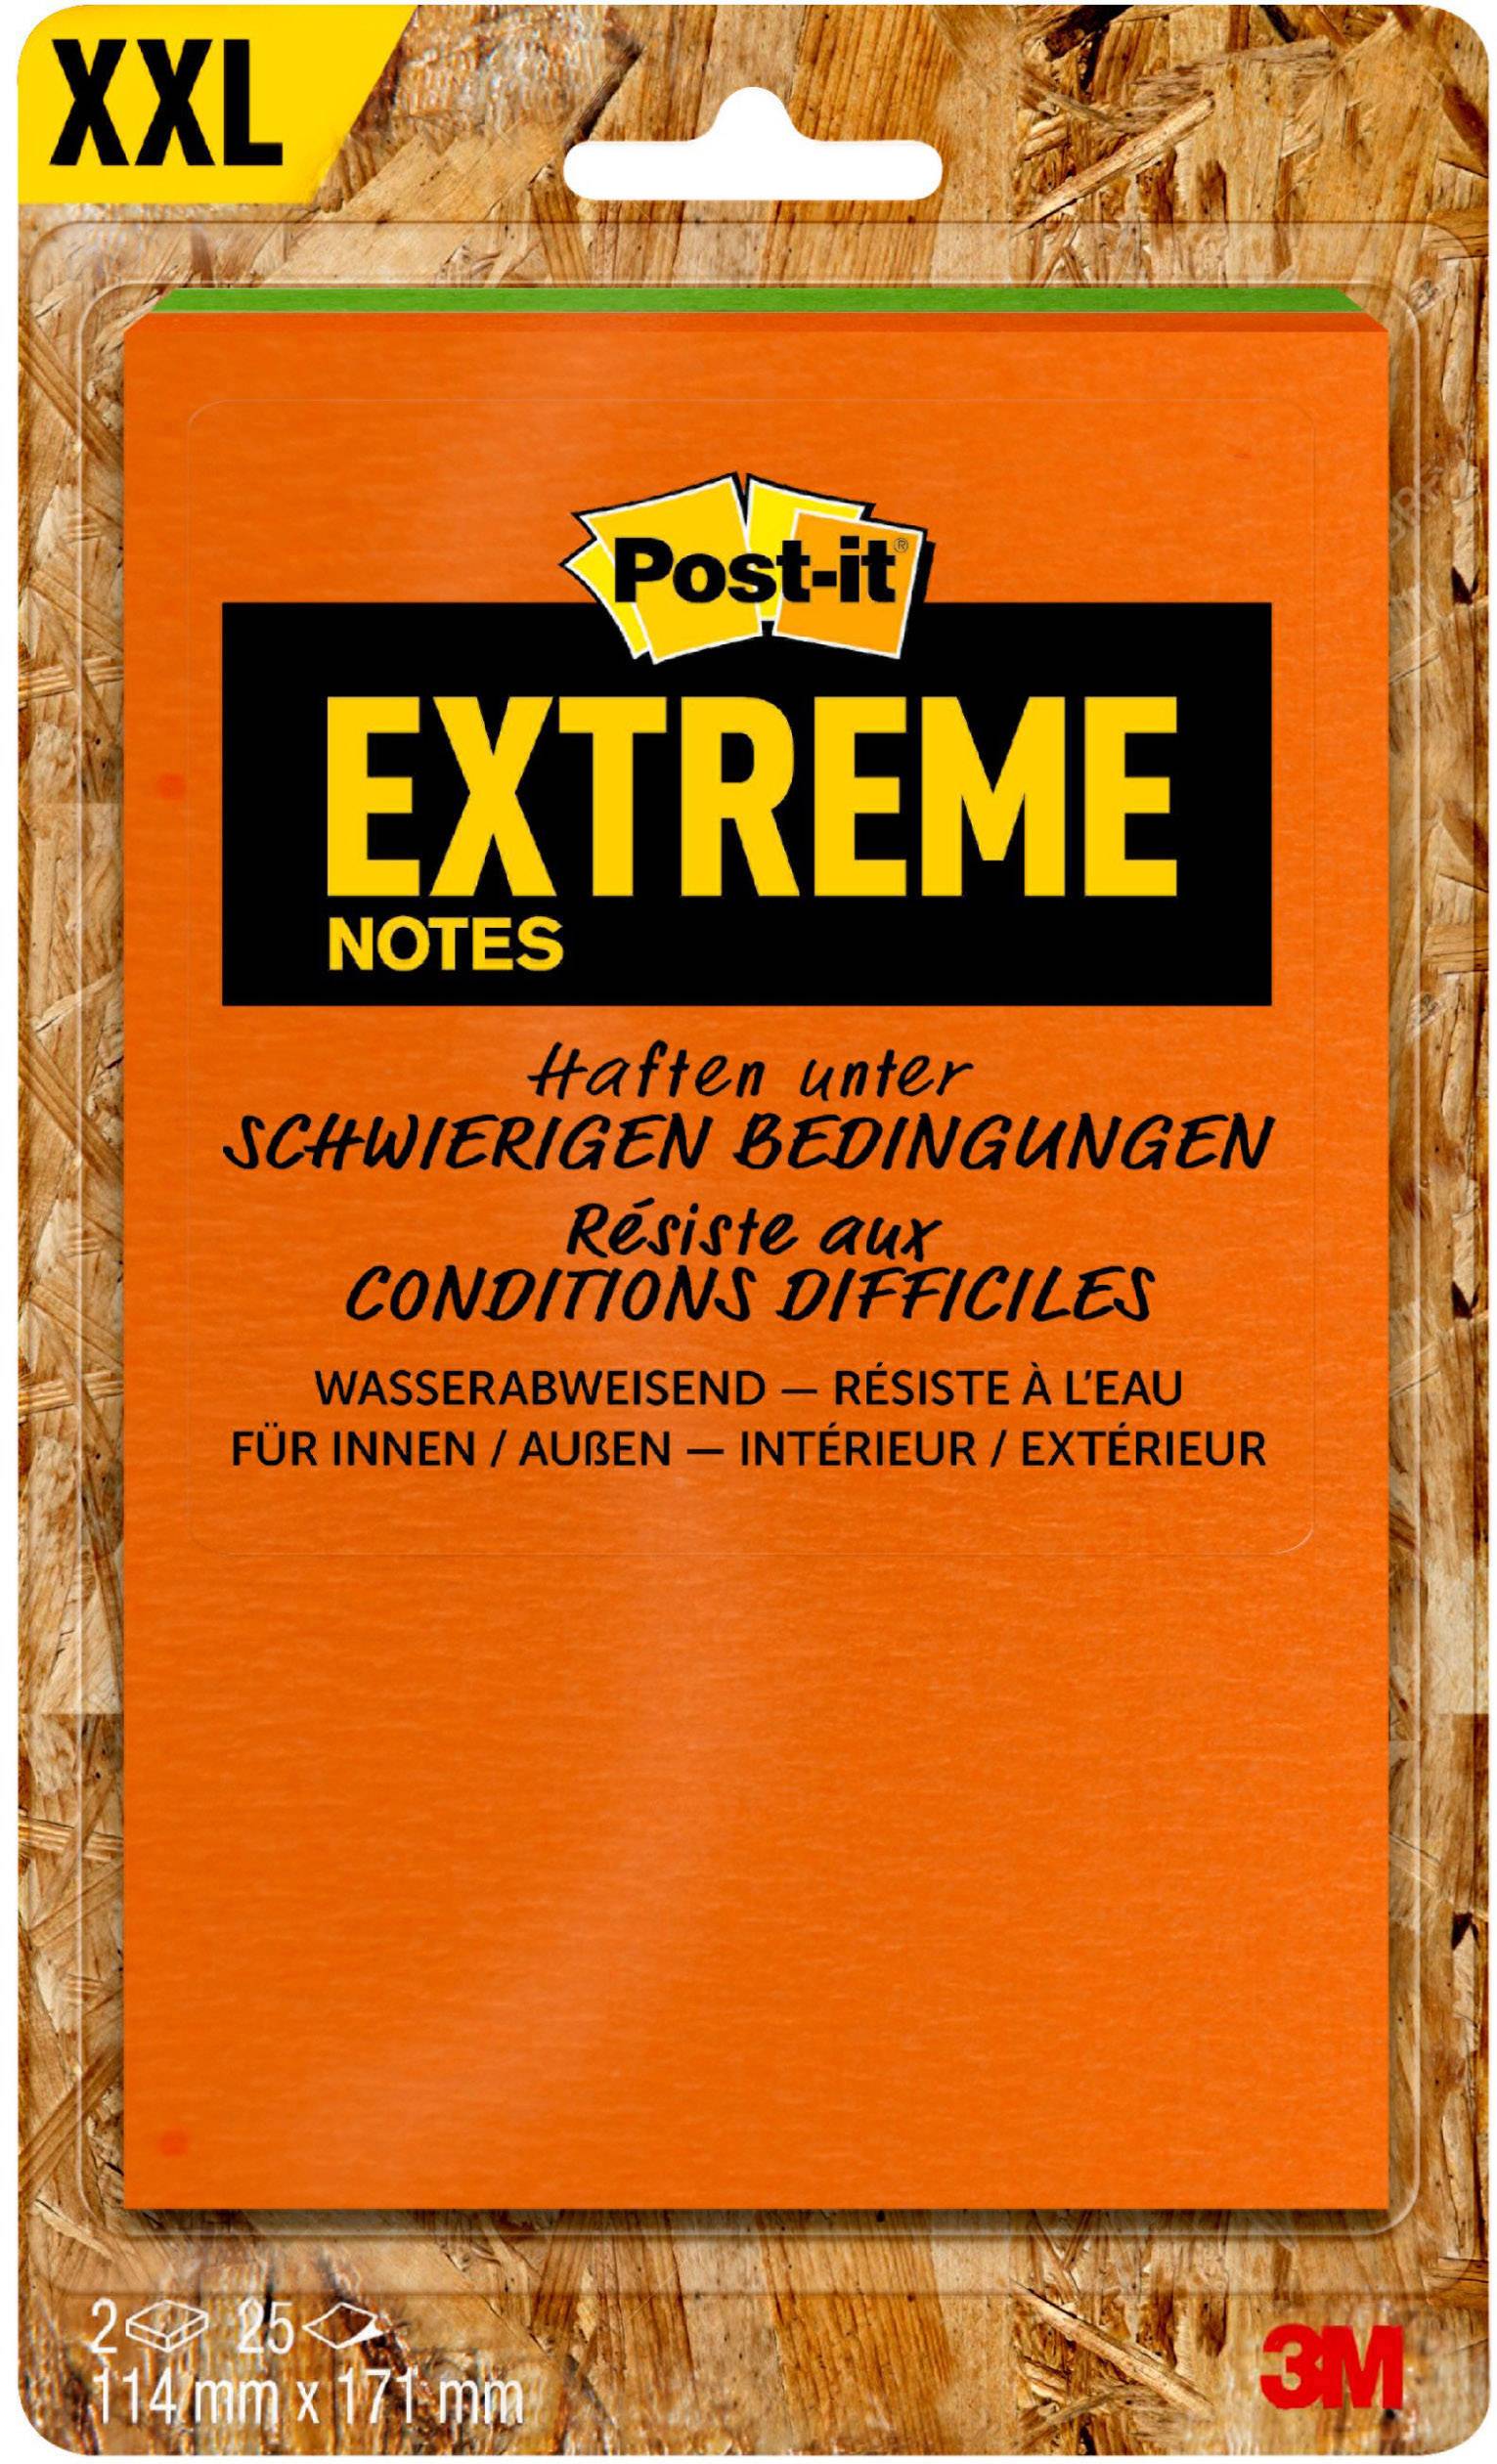 Post-it Extreme Notes Yellow/Green Orange/Green 2 Pads 114 mm x 171 mm 